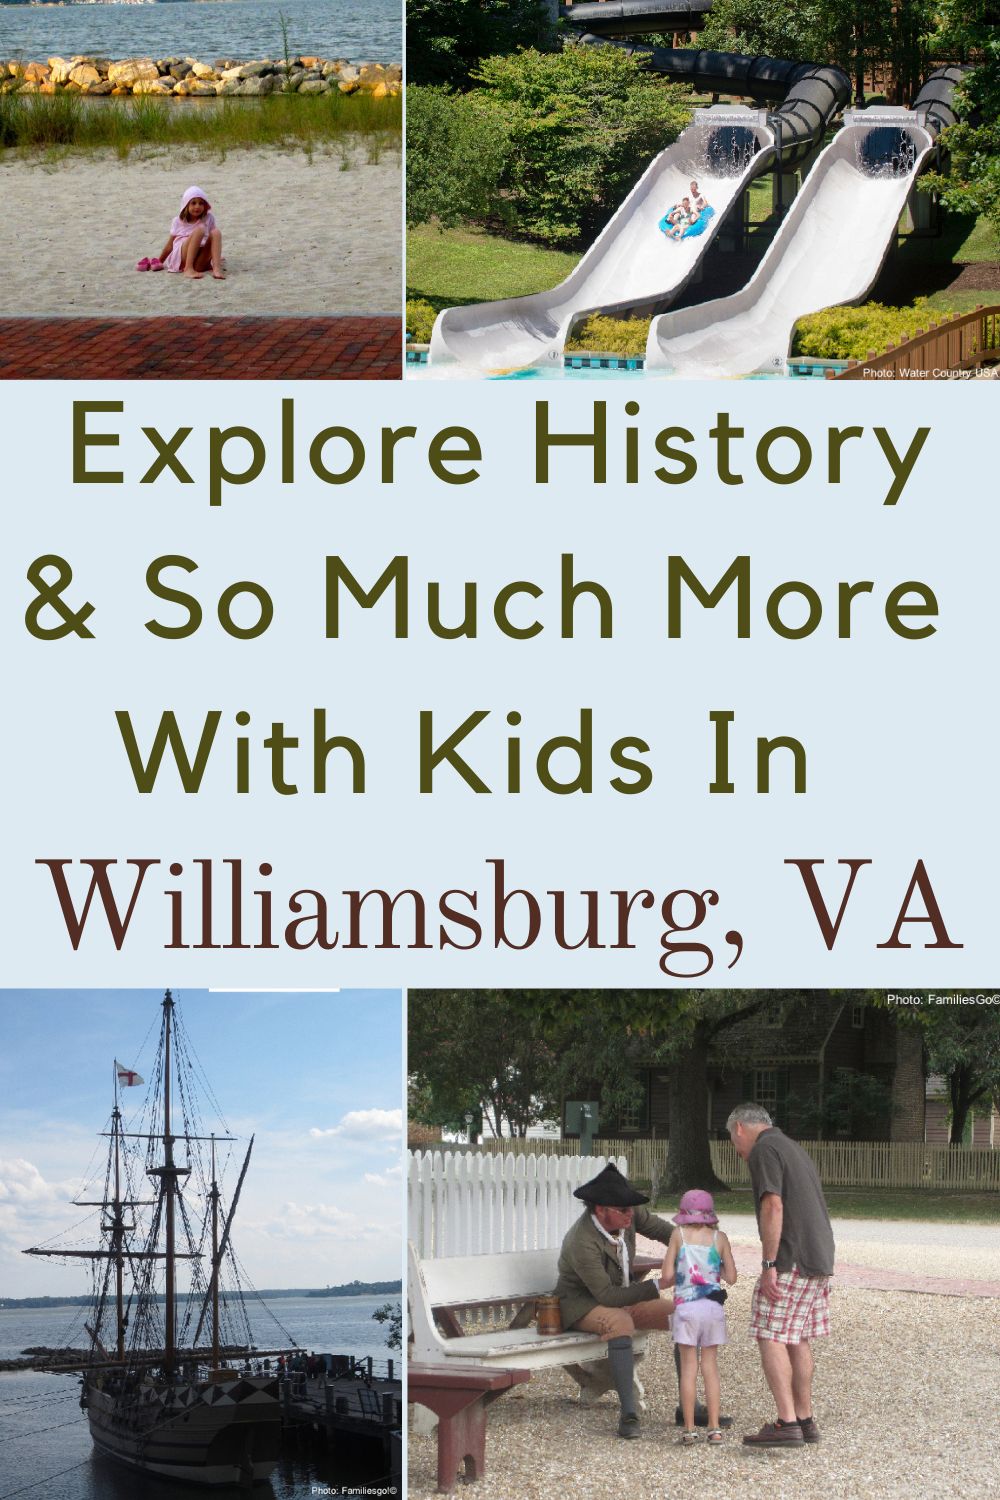 here are 8 awesome things to do with kids in williamsburg, va including the historic sites, restaurants a family-friendly resort and more.